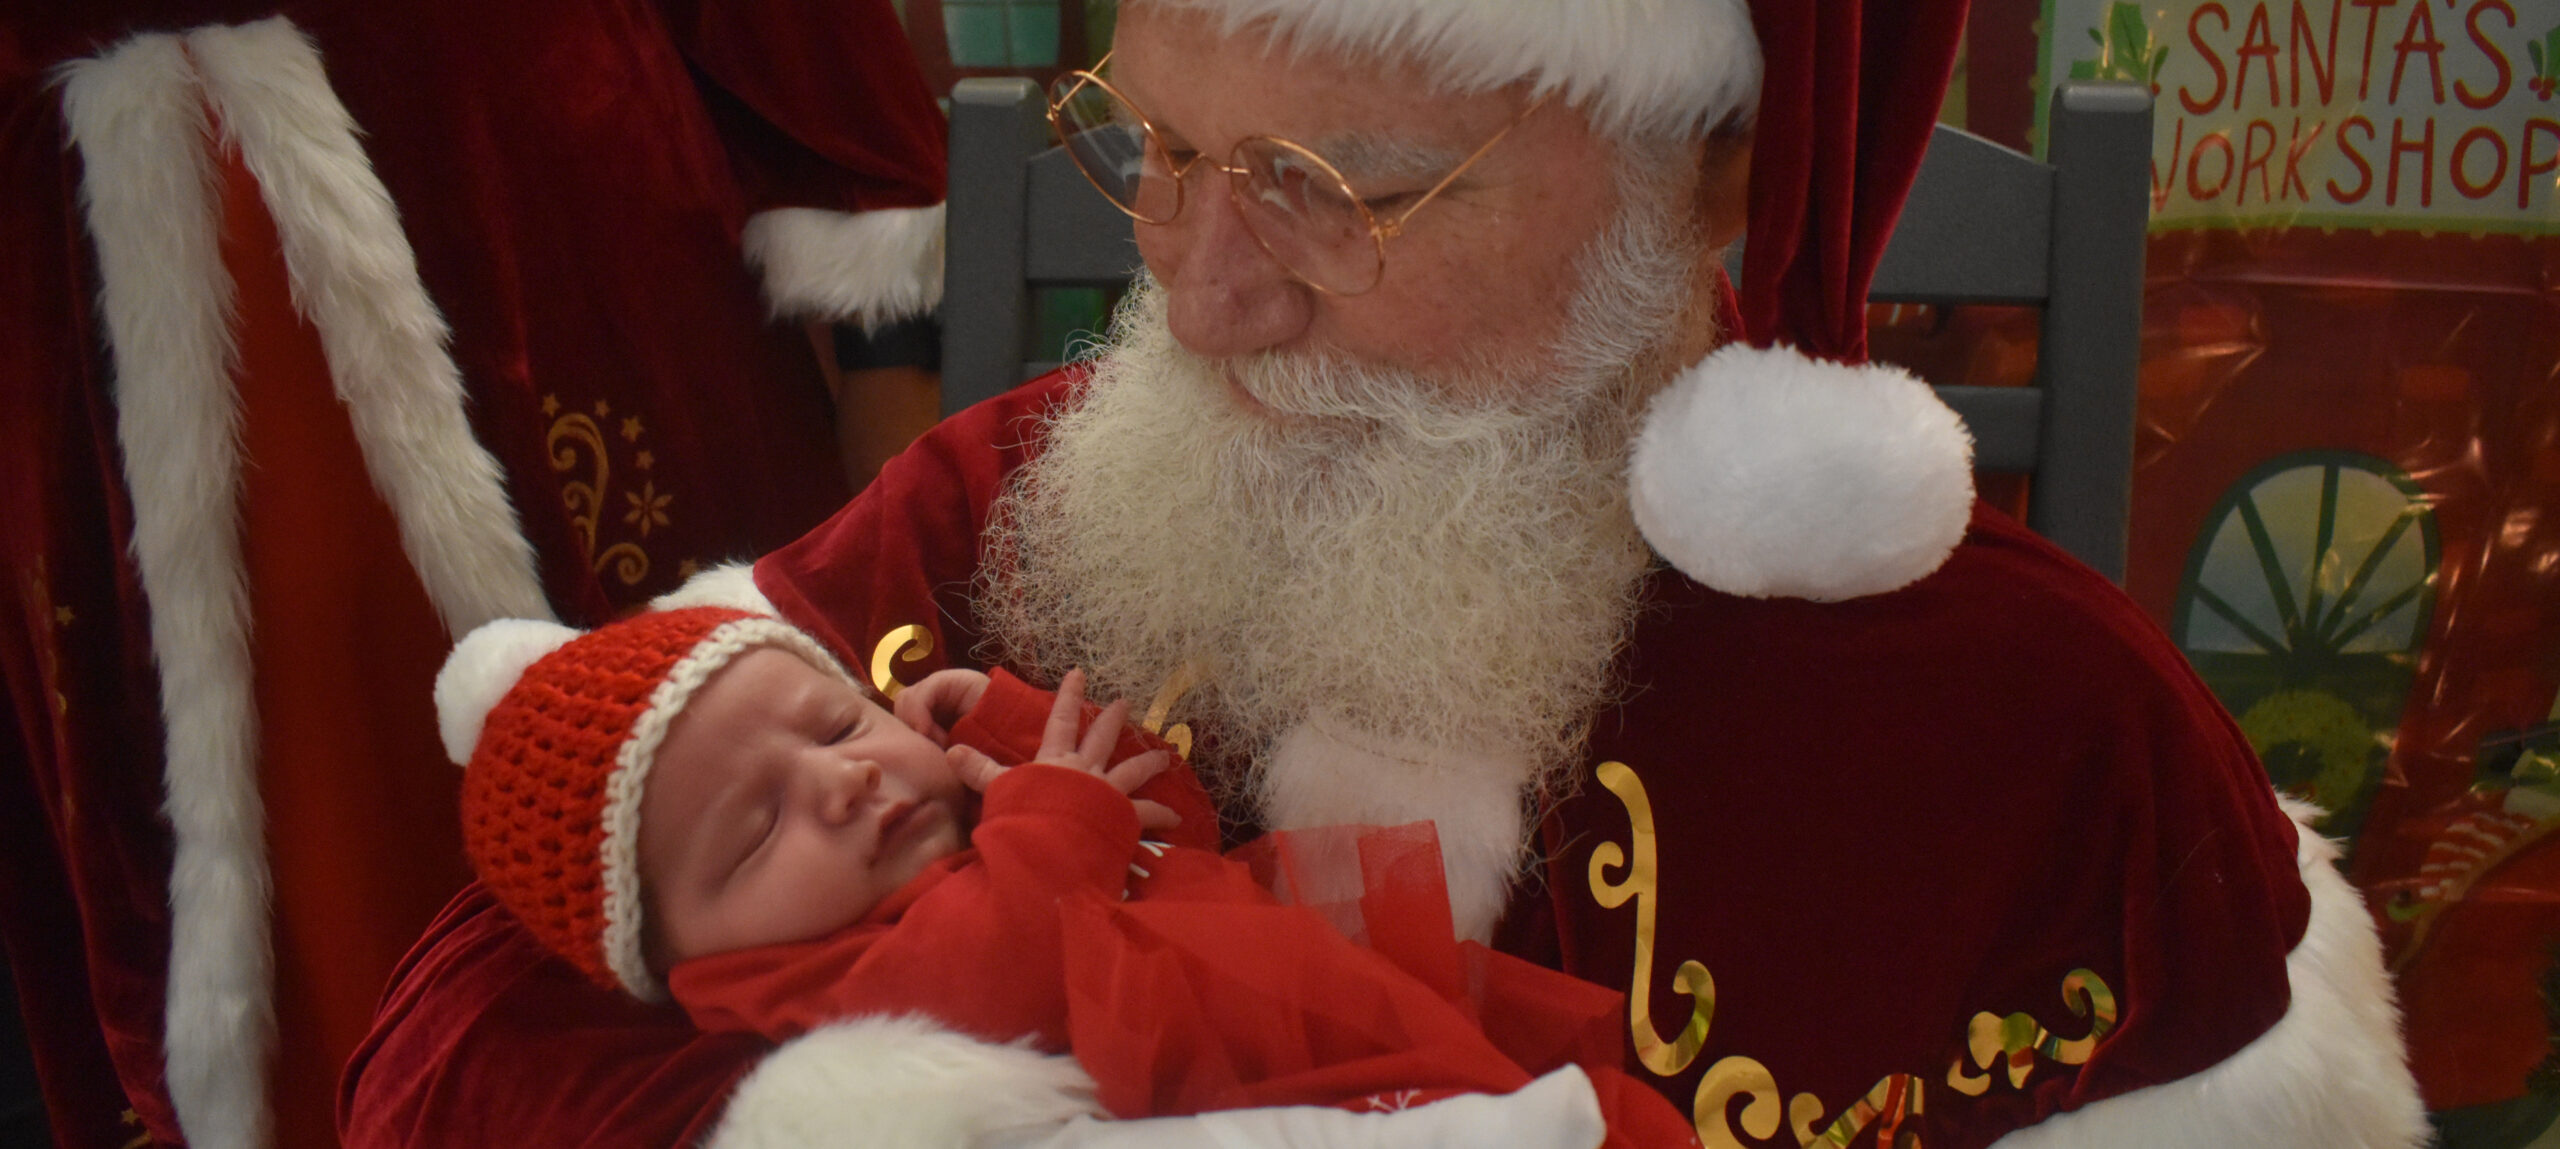 Santa holding a baby in the NICU at UofL Hospital. The baby is wearing a red Christmas-themed outfit, including a red knitted hat.